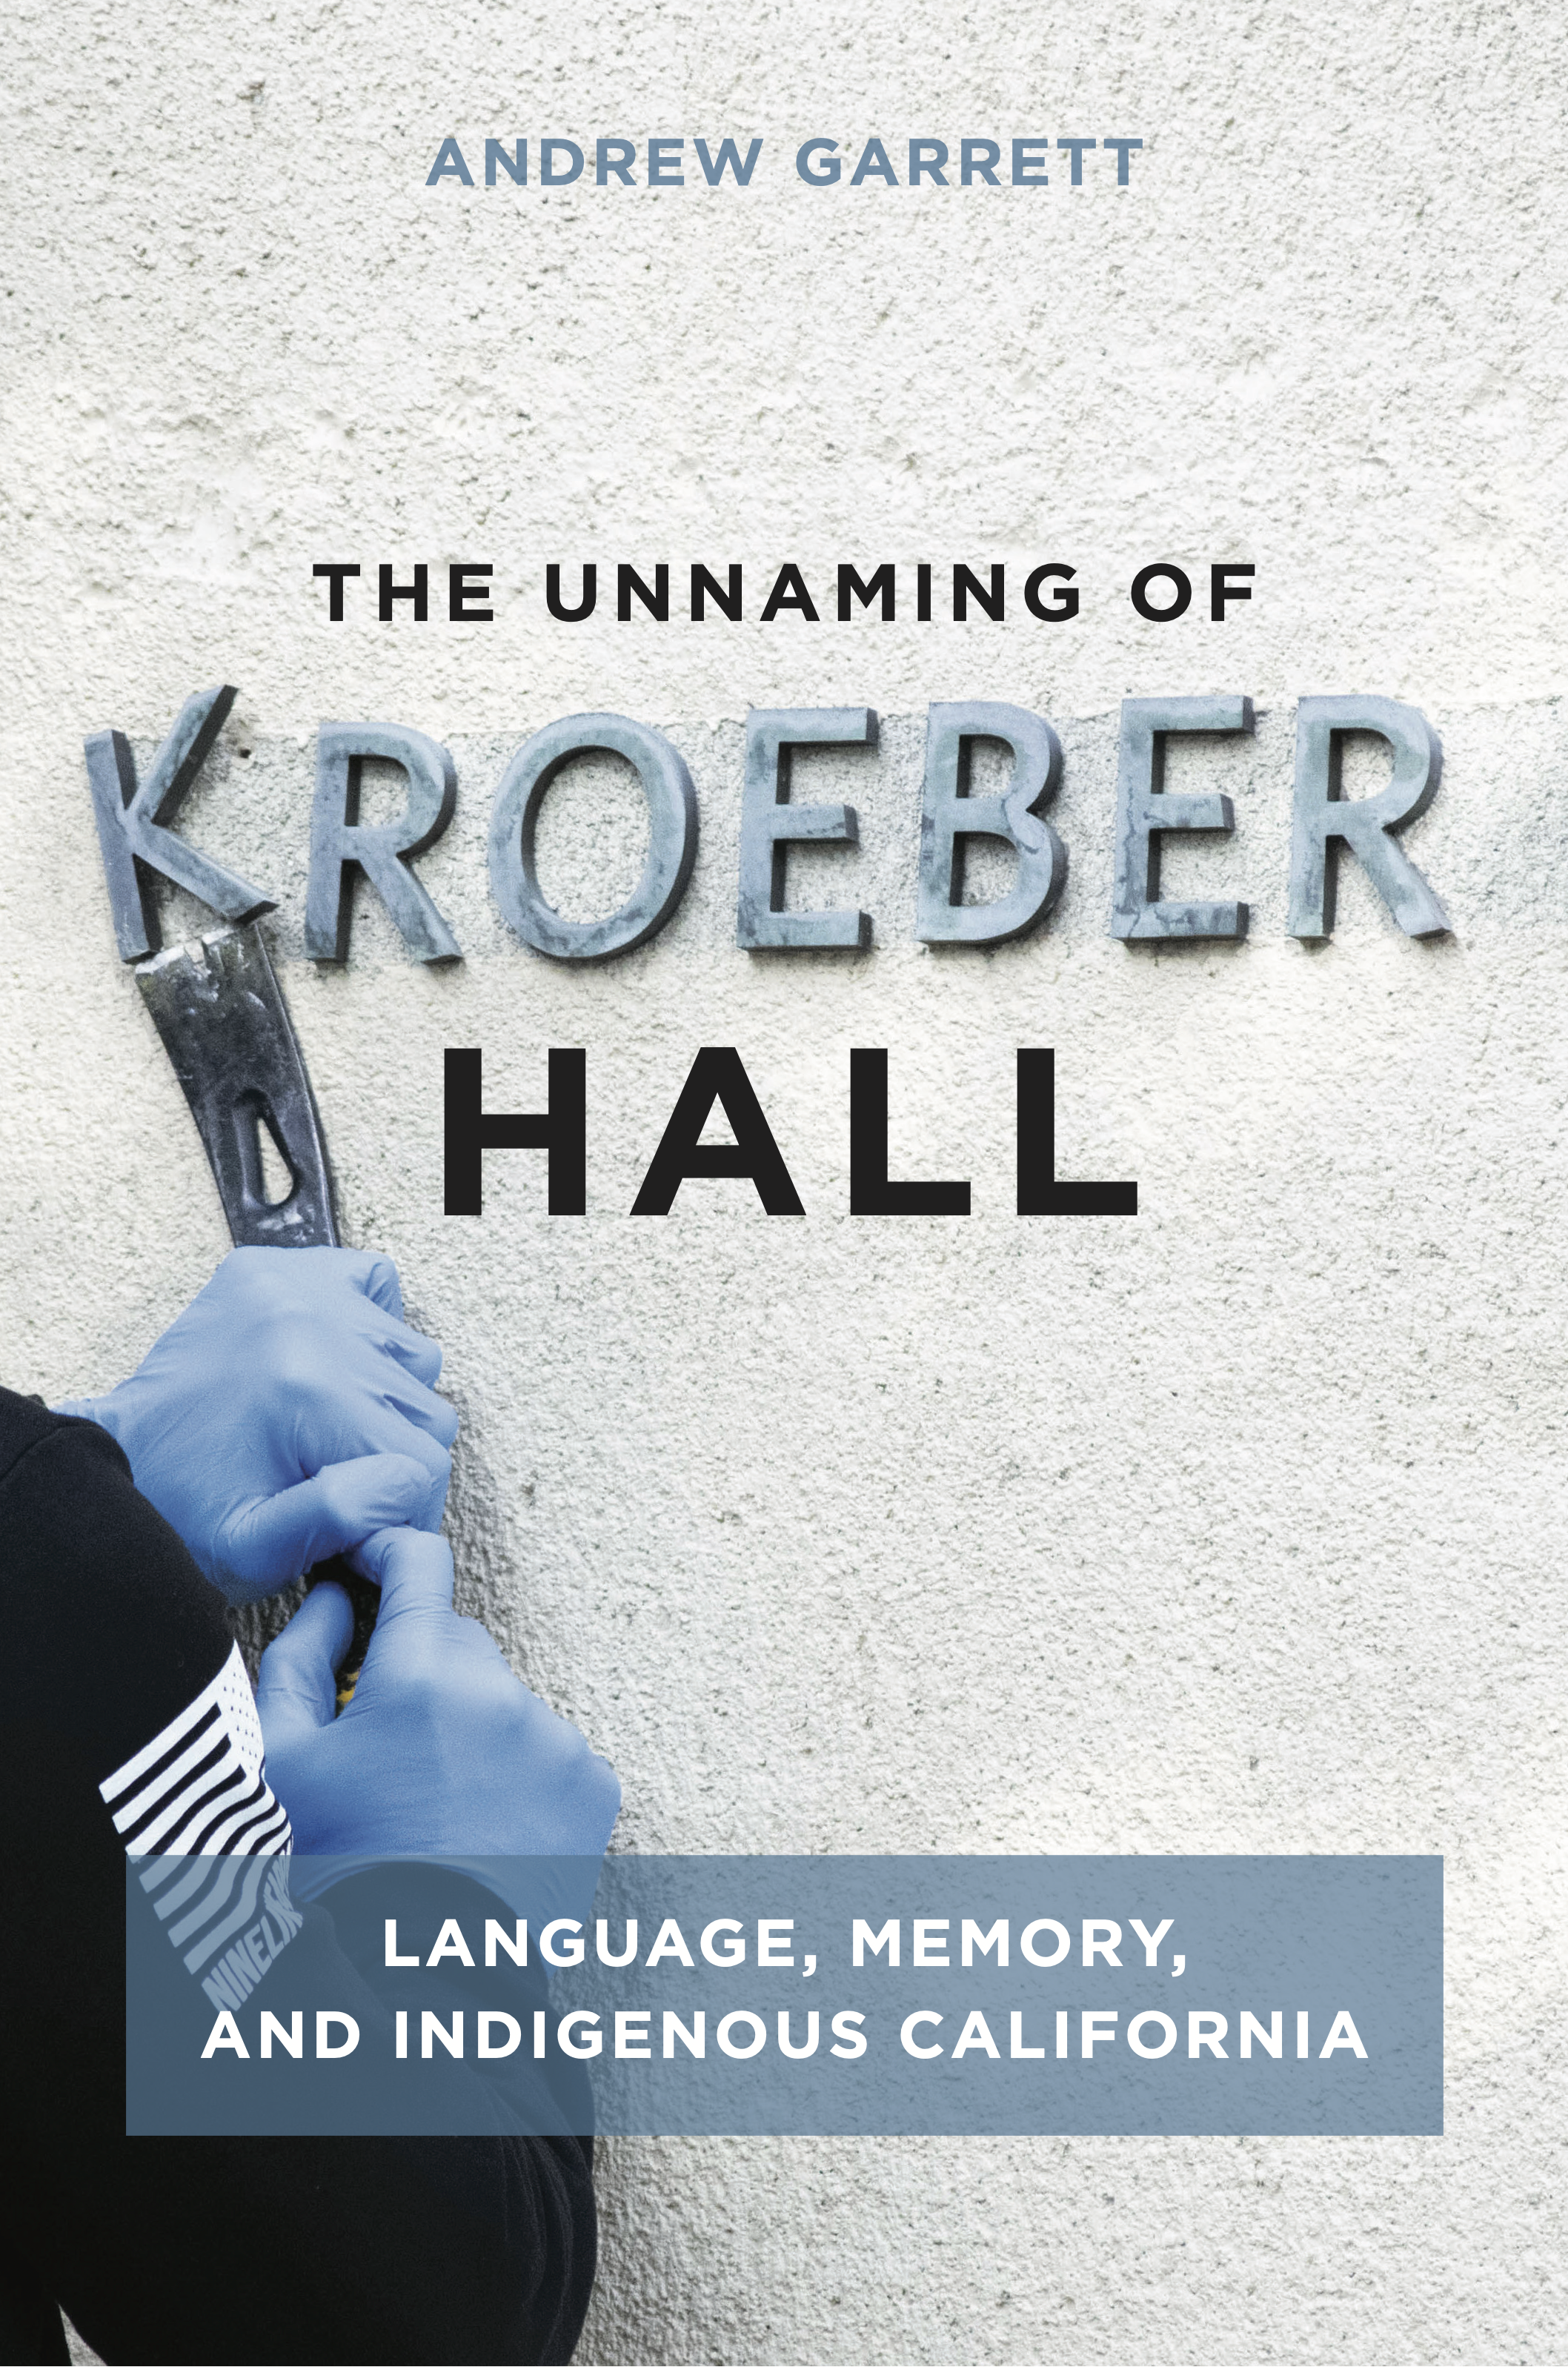 Book cover - a person prying the K off the wall of a building